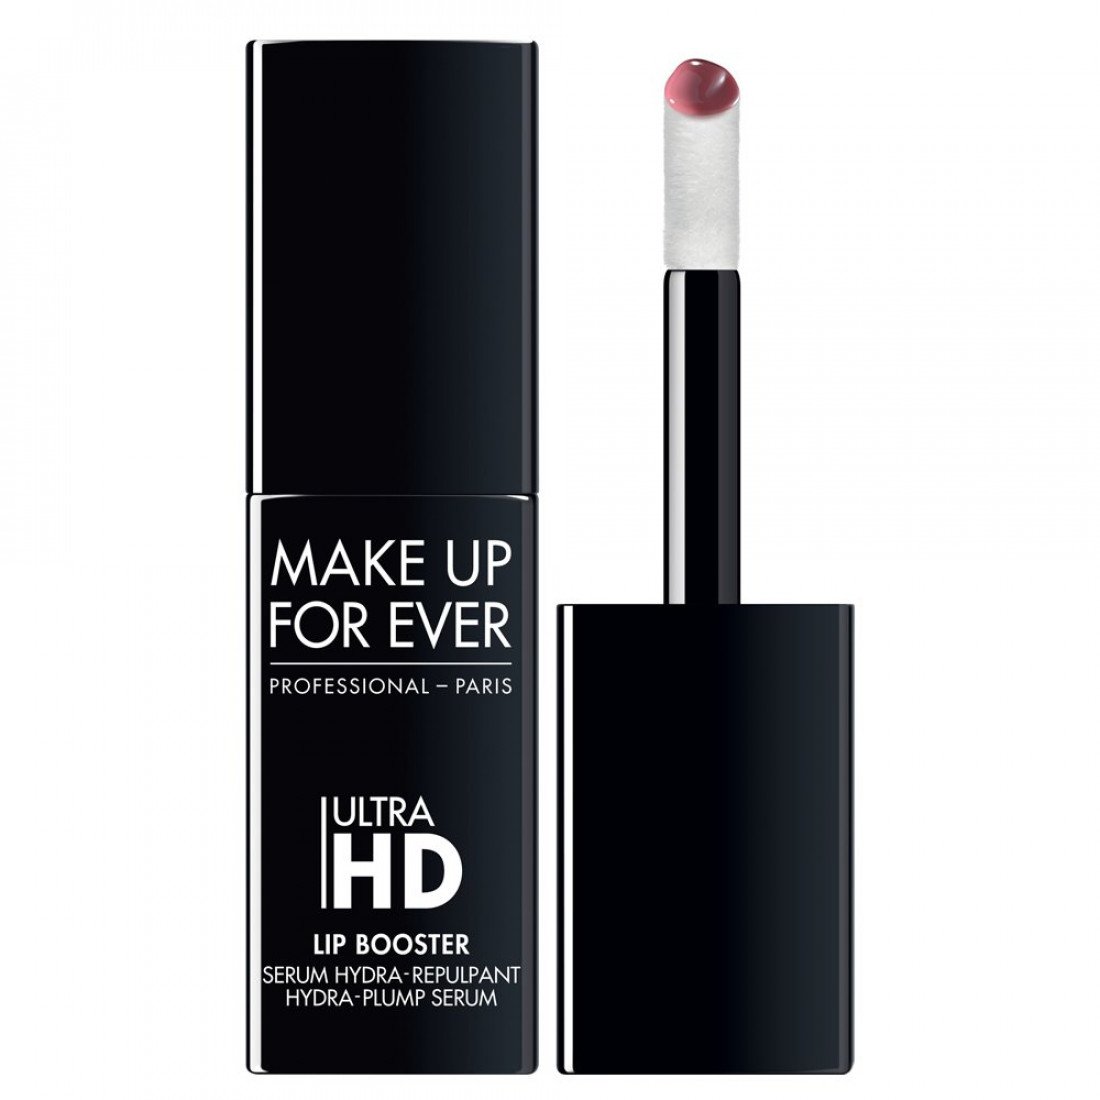 MAKE UP FOR EVER ULTRA HD LIP BOOSTER NO.01 CINEMA 6ML